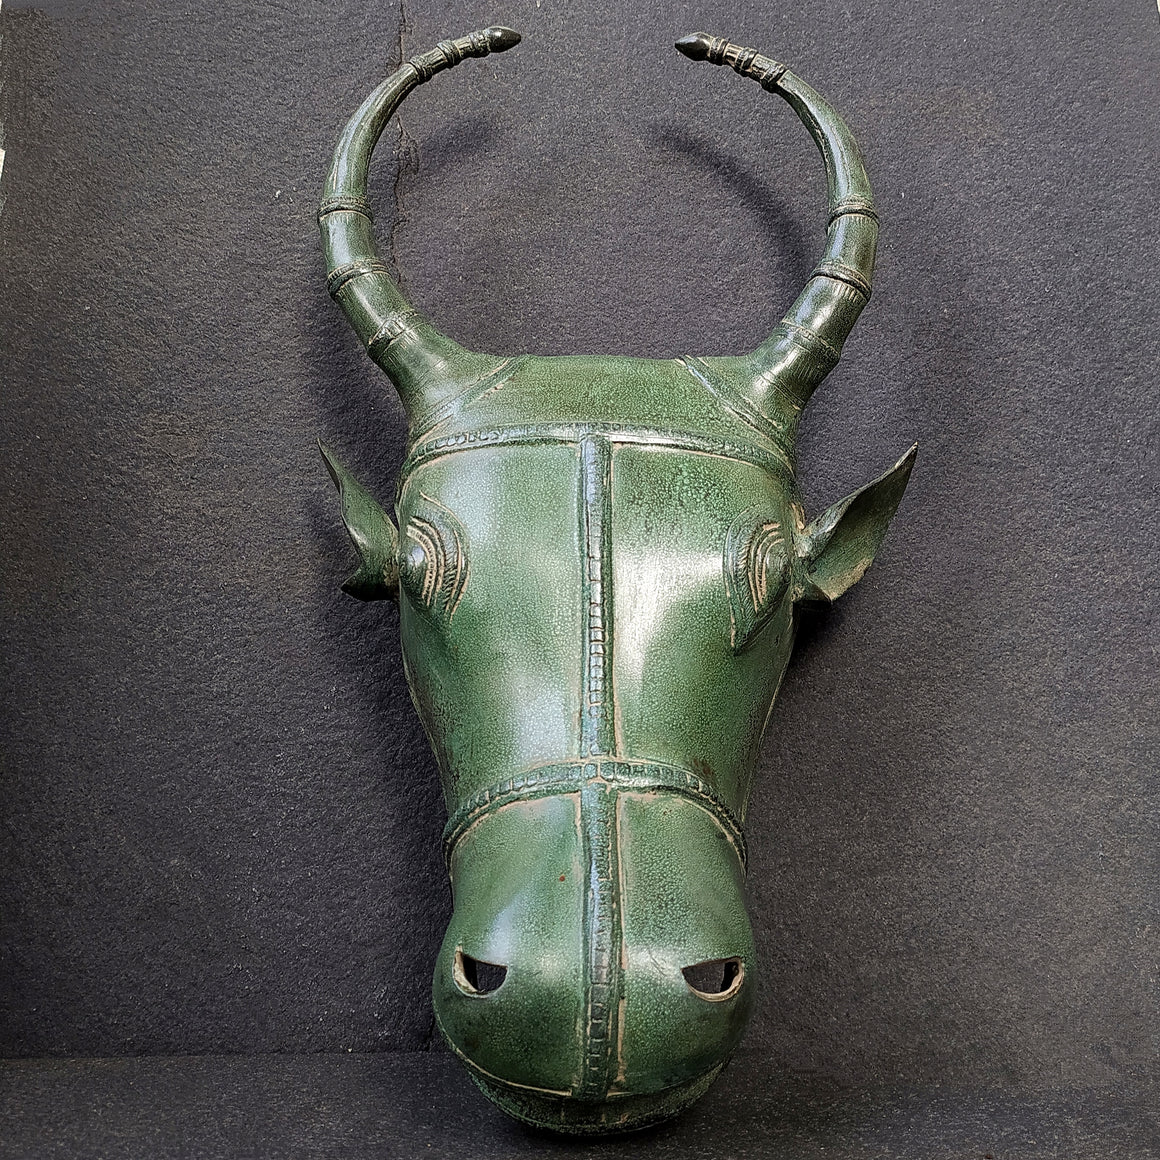 Majestic Brass Nandi Bull - Vahan Of Lord Shiva Crafted With A Rich Green Patina. Height 45 cm x Width 25 cm x Depth 11 cm